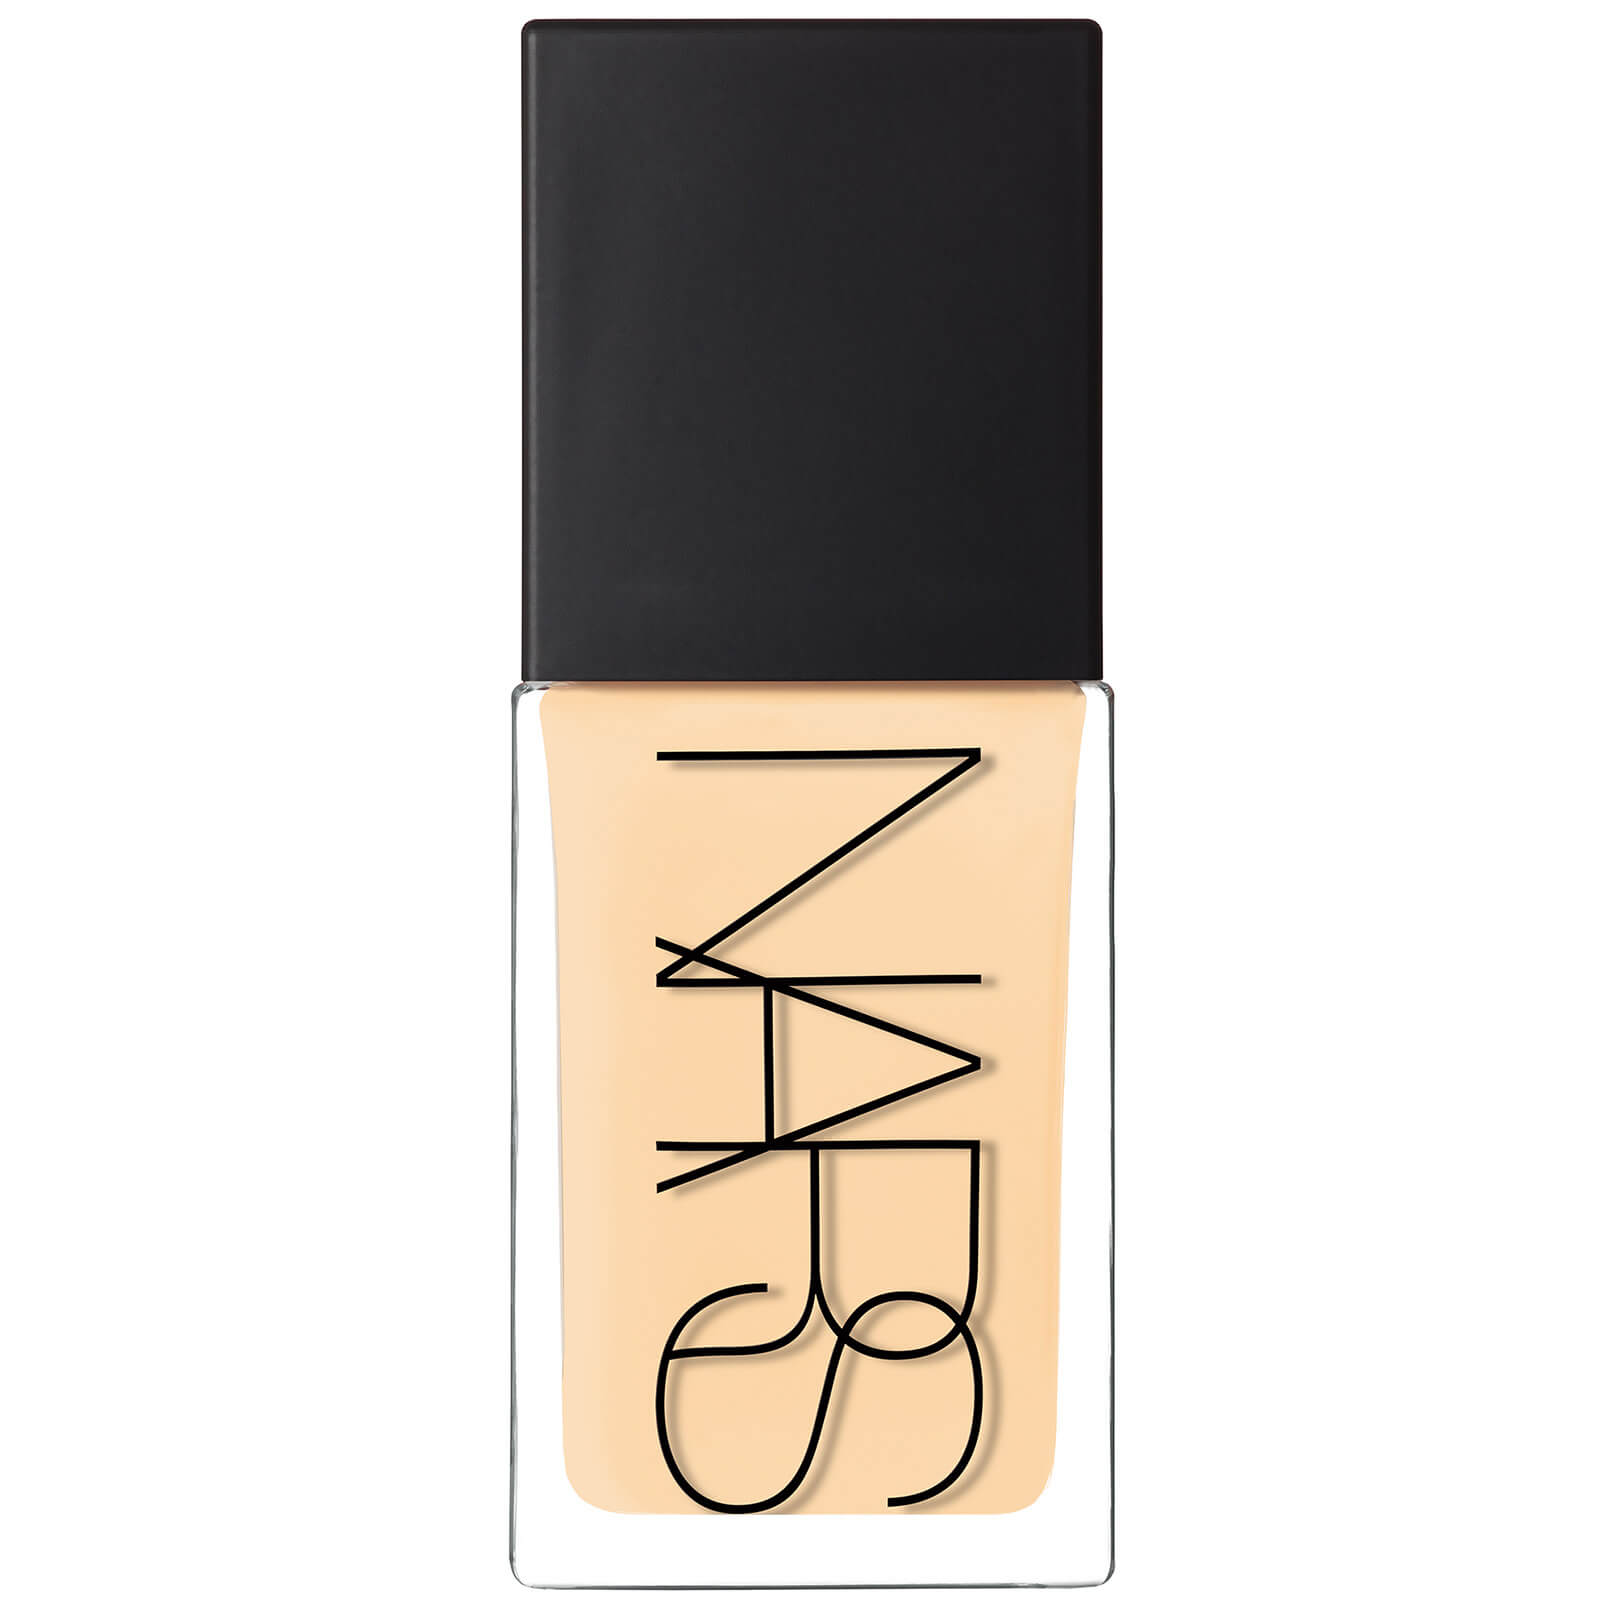 NARS Light Reflecting Foundation 30ml (Various Shades) - Deauville